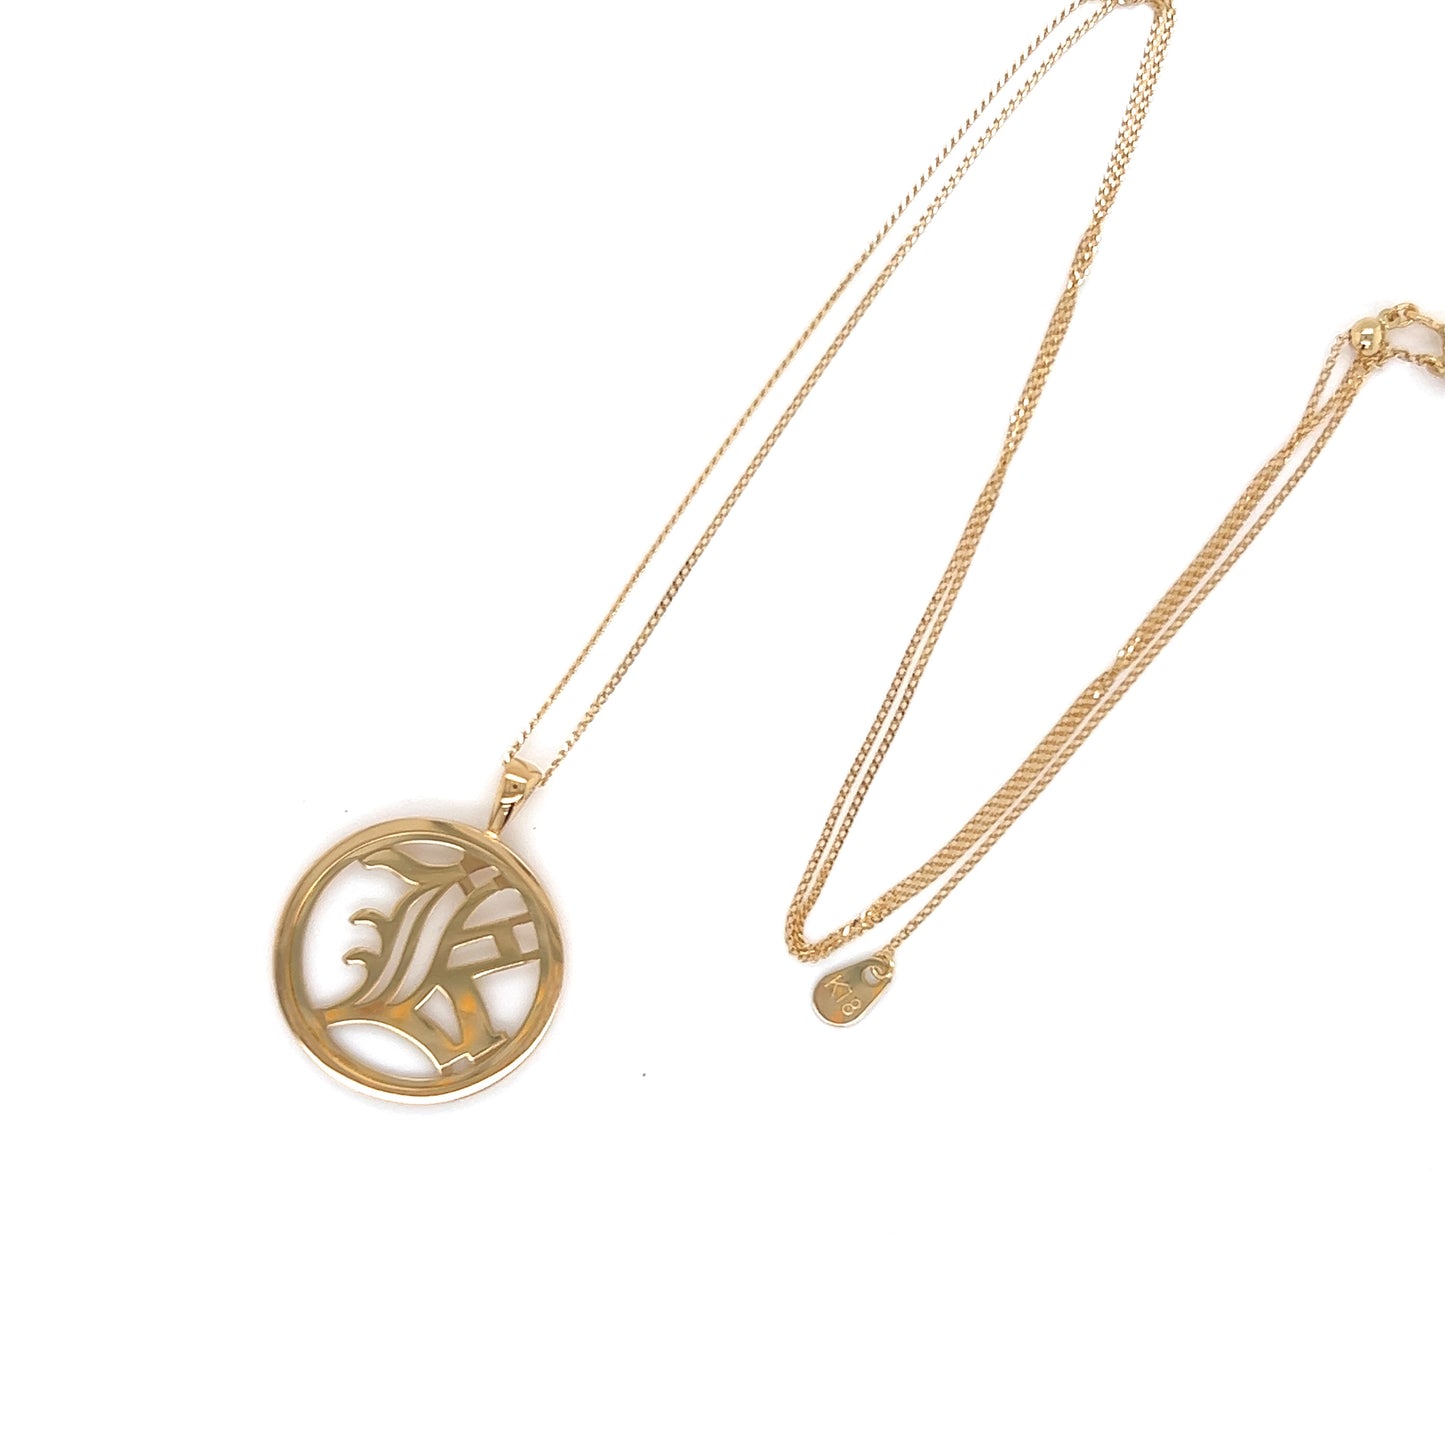 Gold Round Initial K Necklace